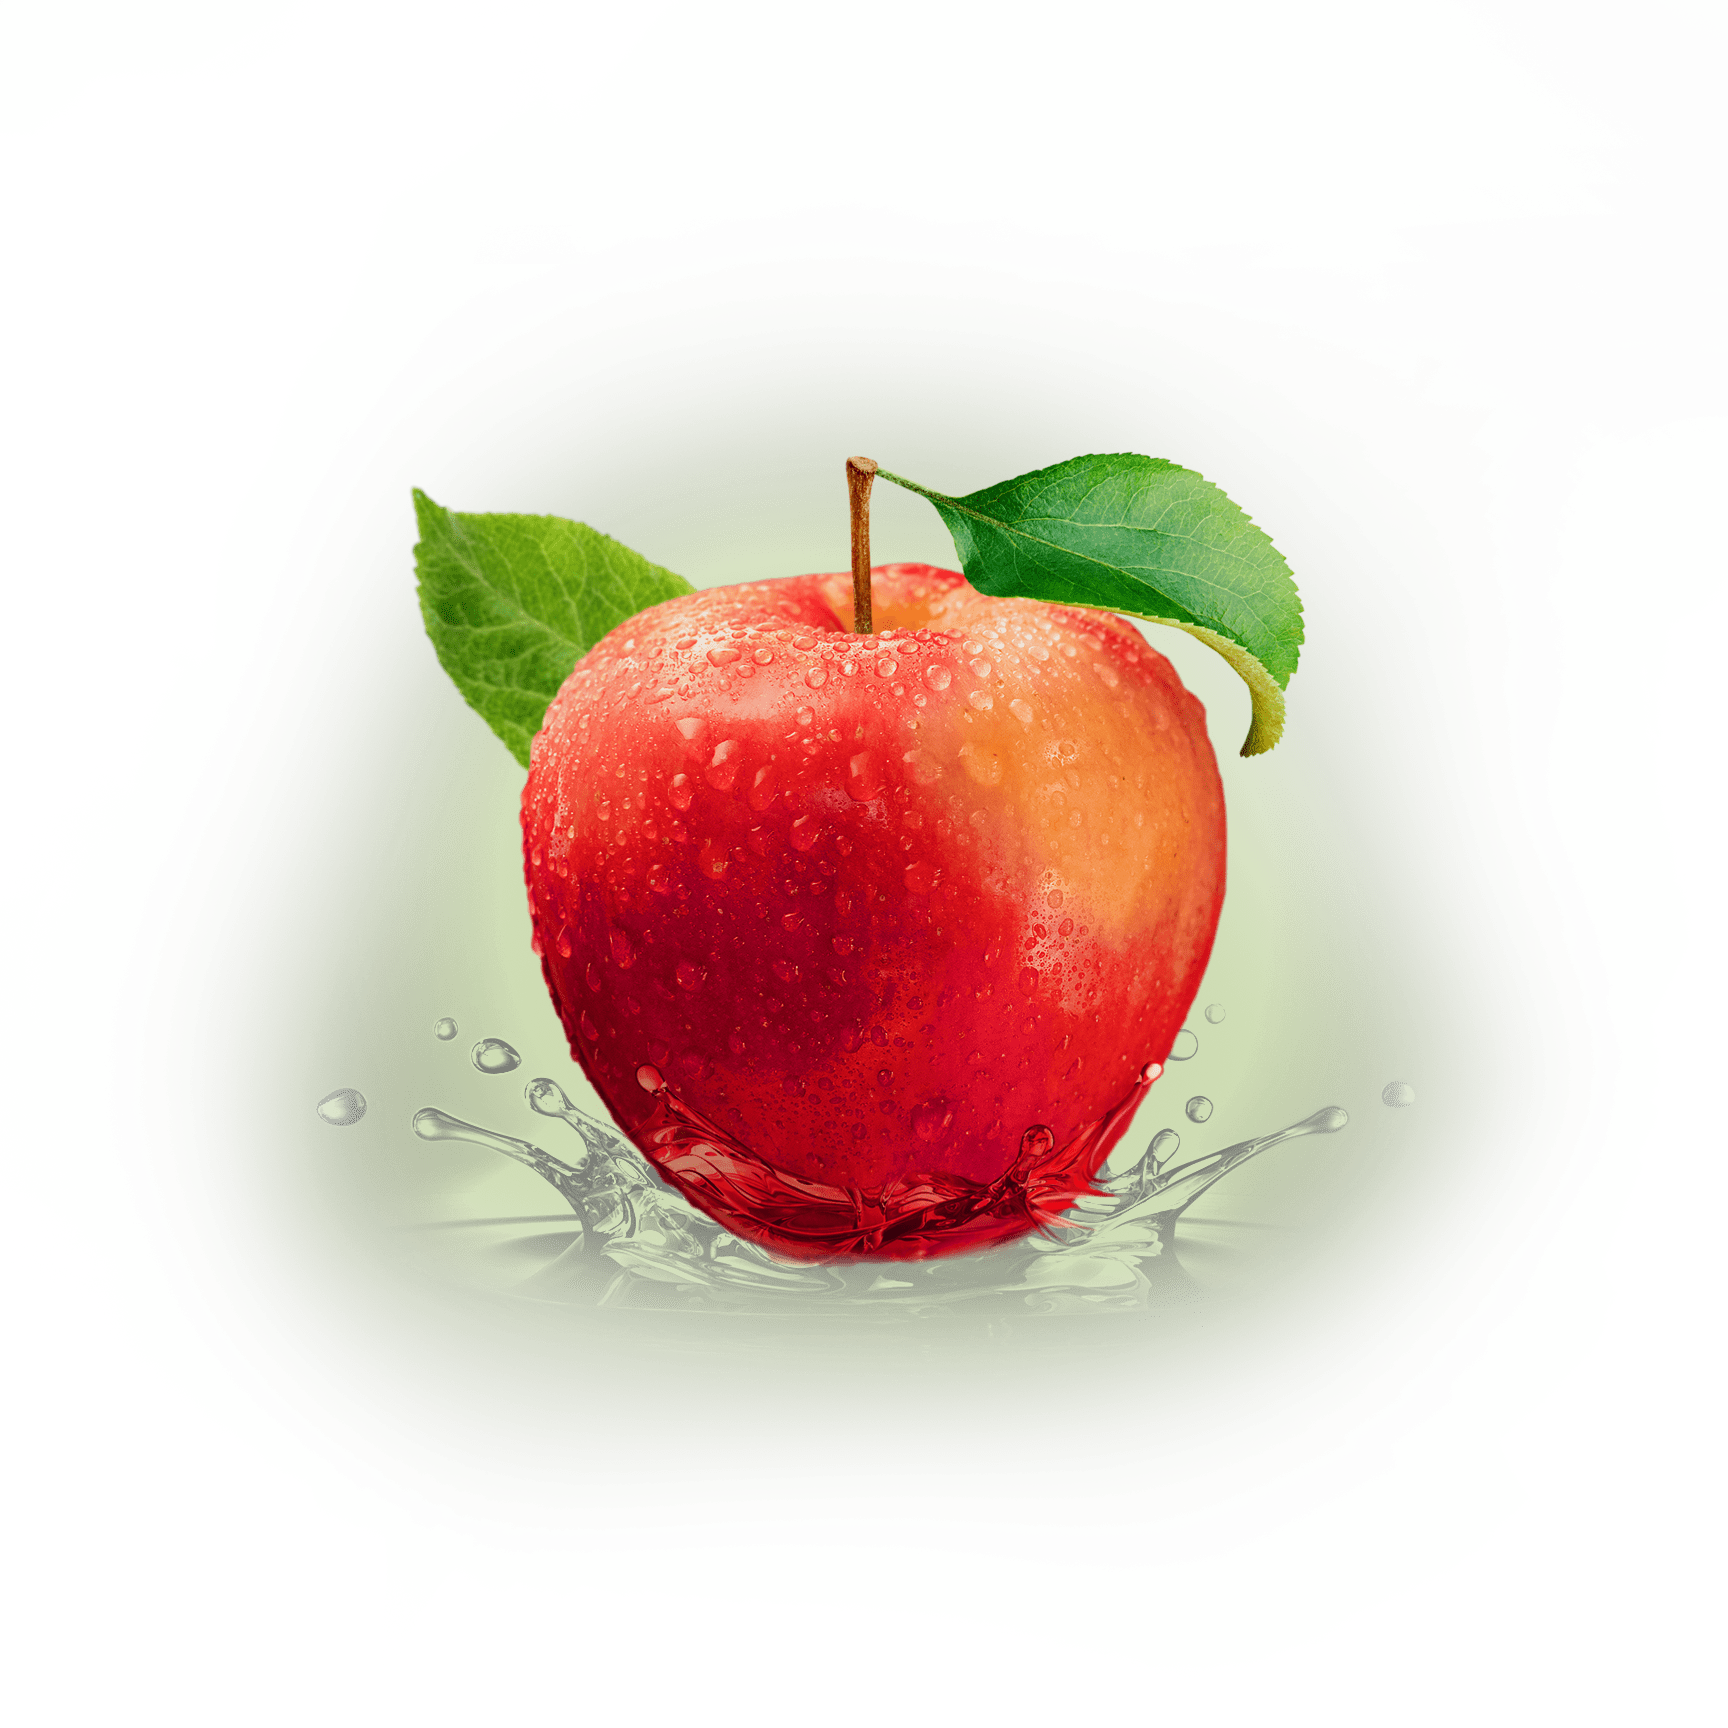 a large juicy red apple with bright green leaves